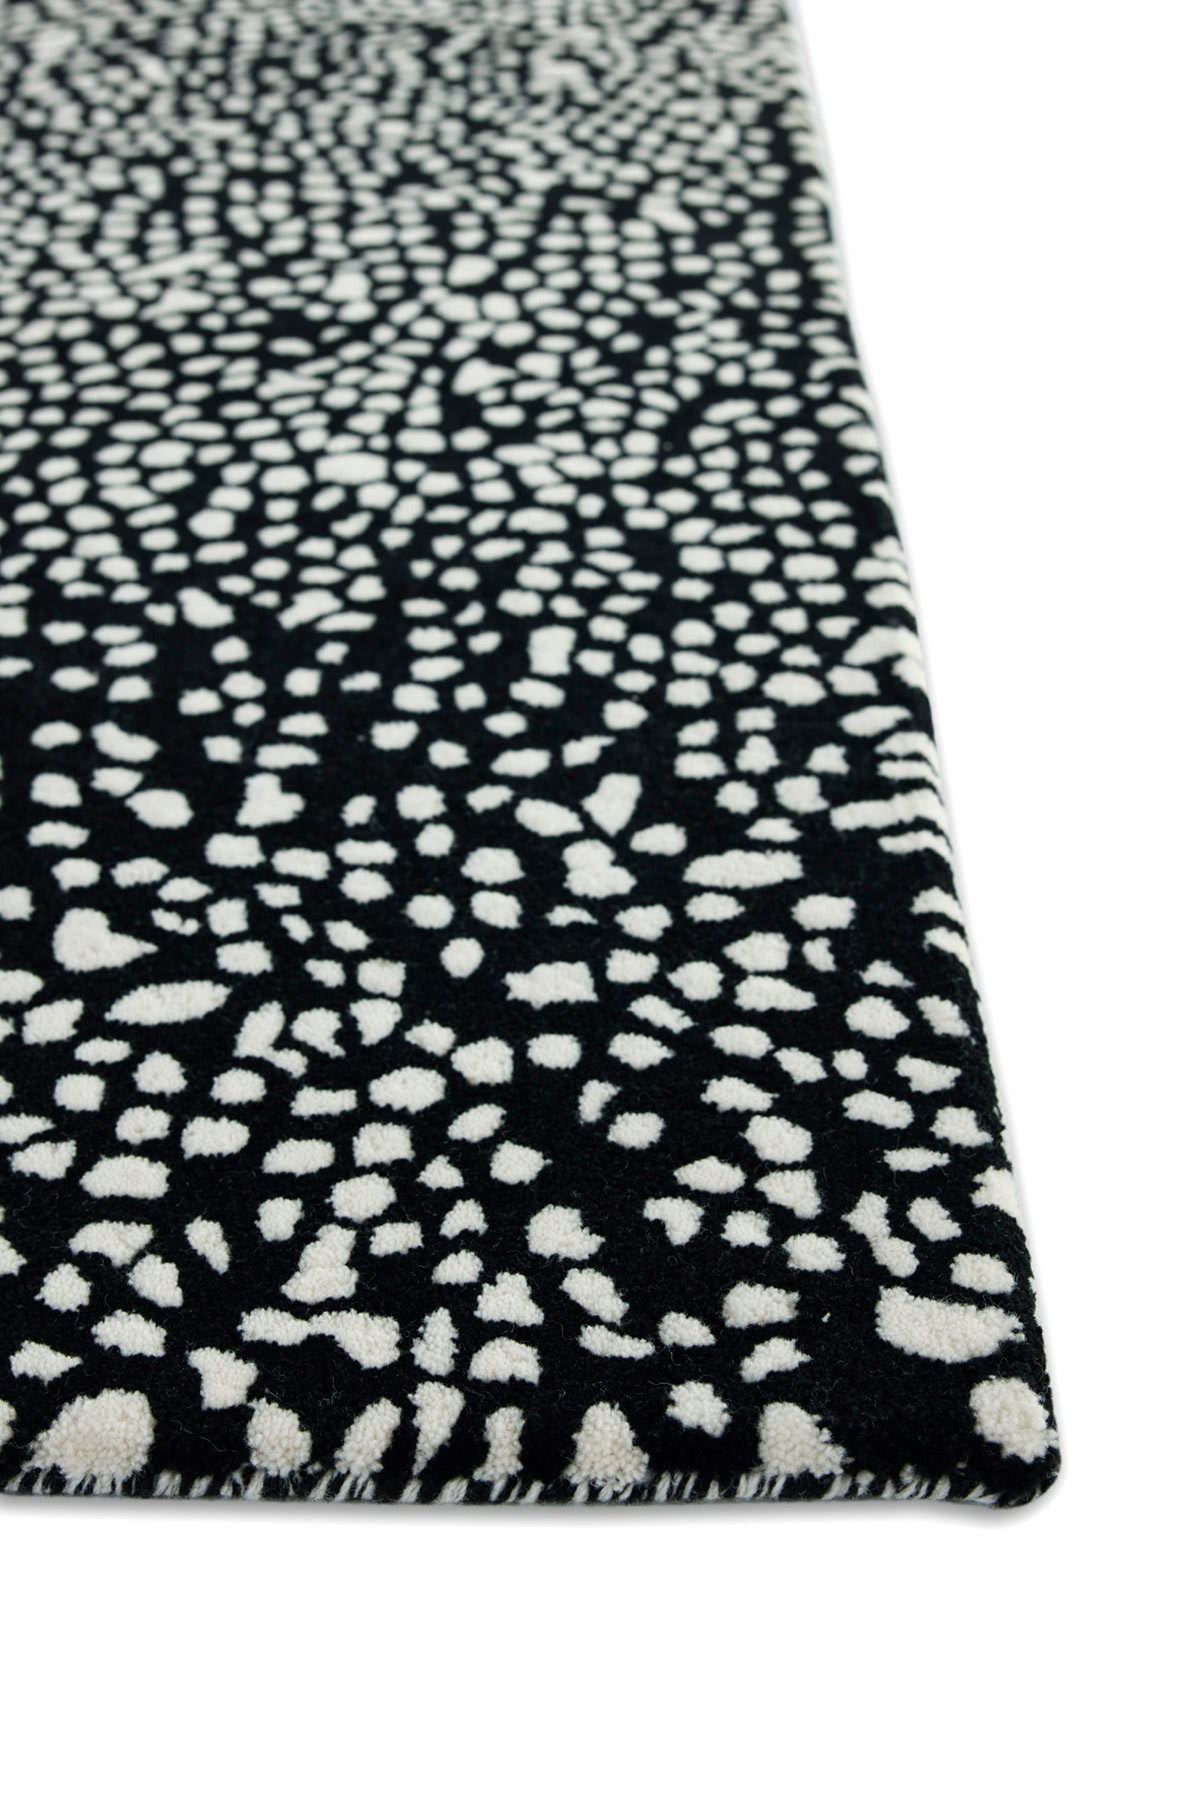 A corner detail of a black and white speckled area rug called Starry Onyx by Angela Adams